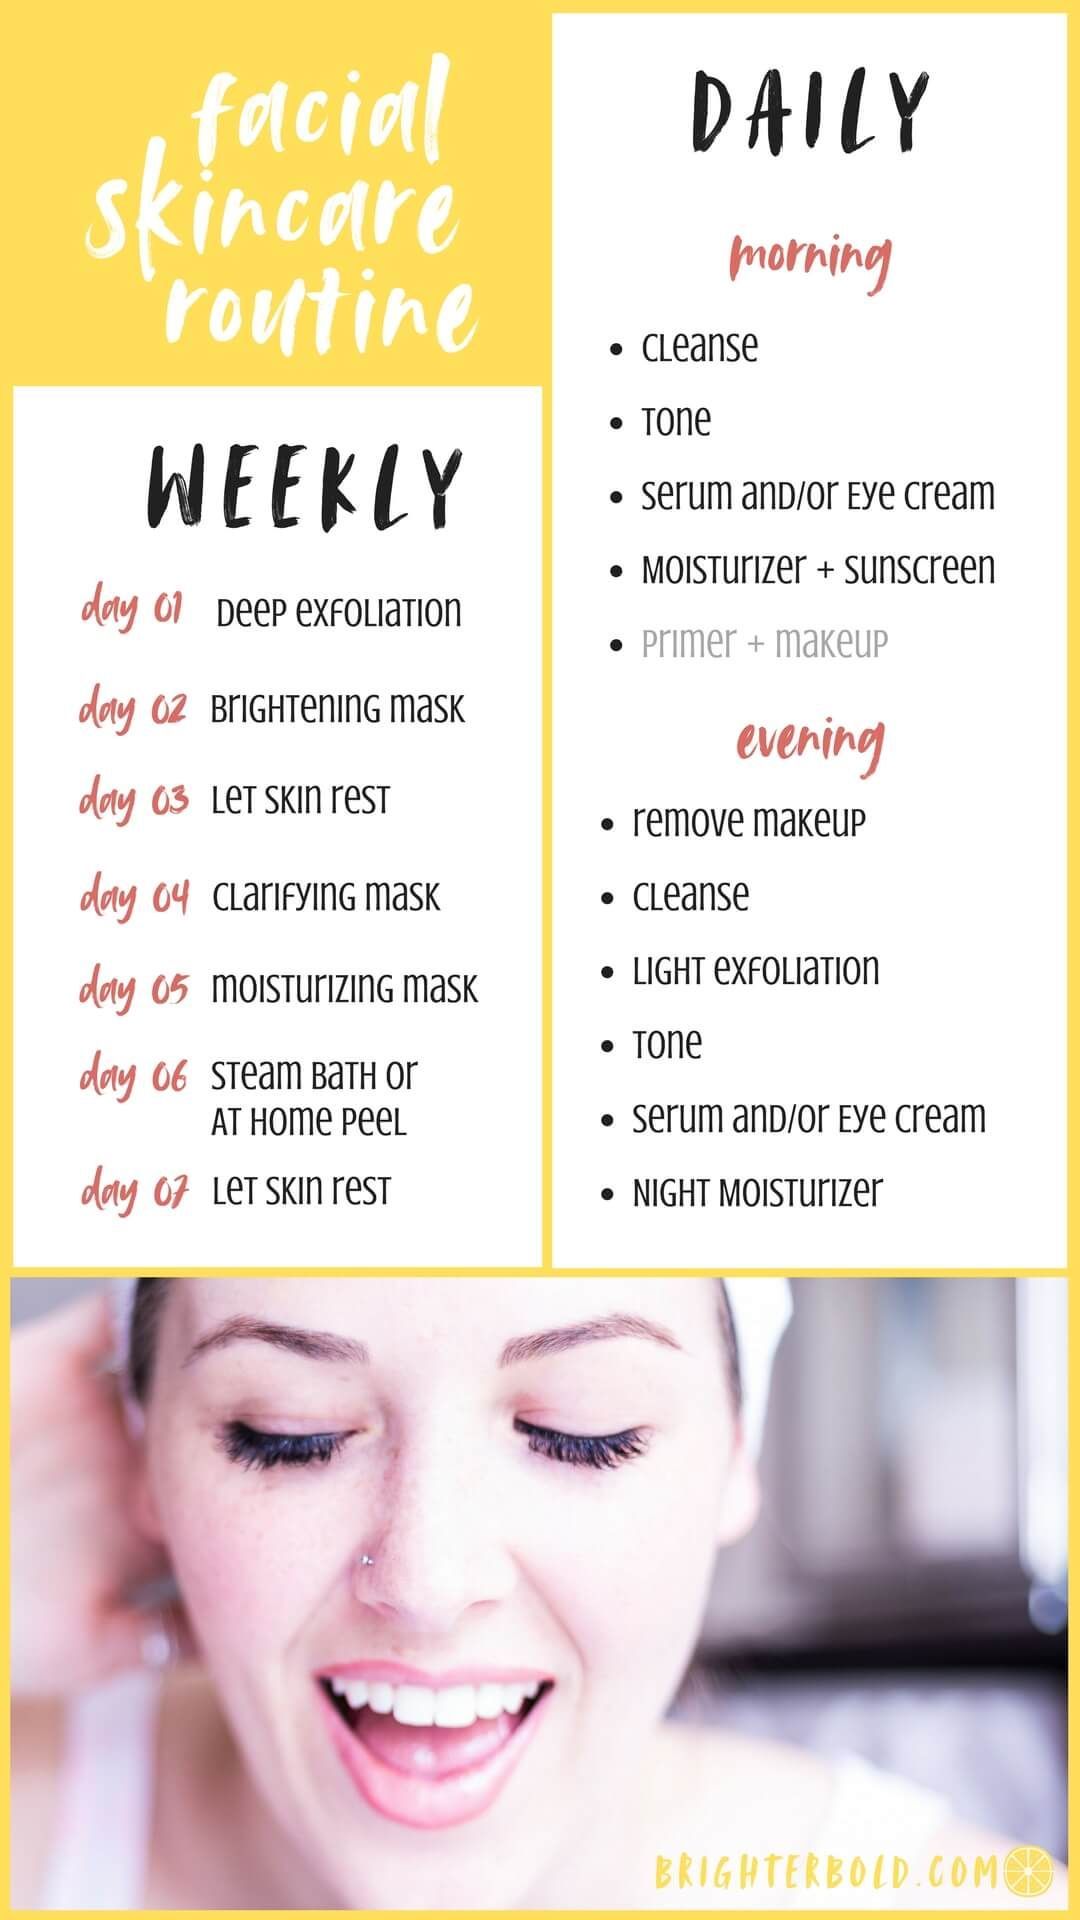 14 weekly beauty Routines ideas